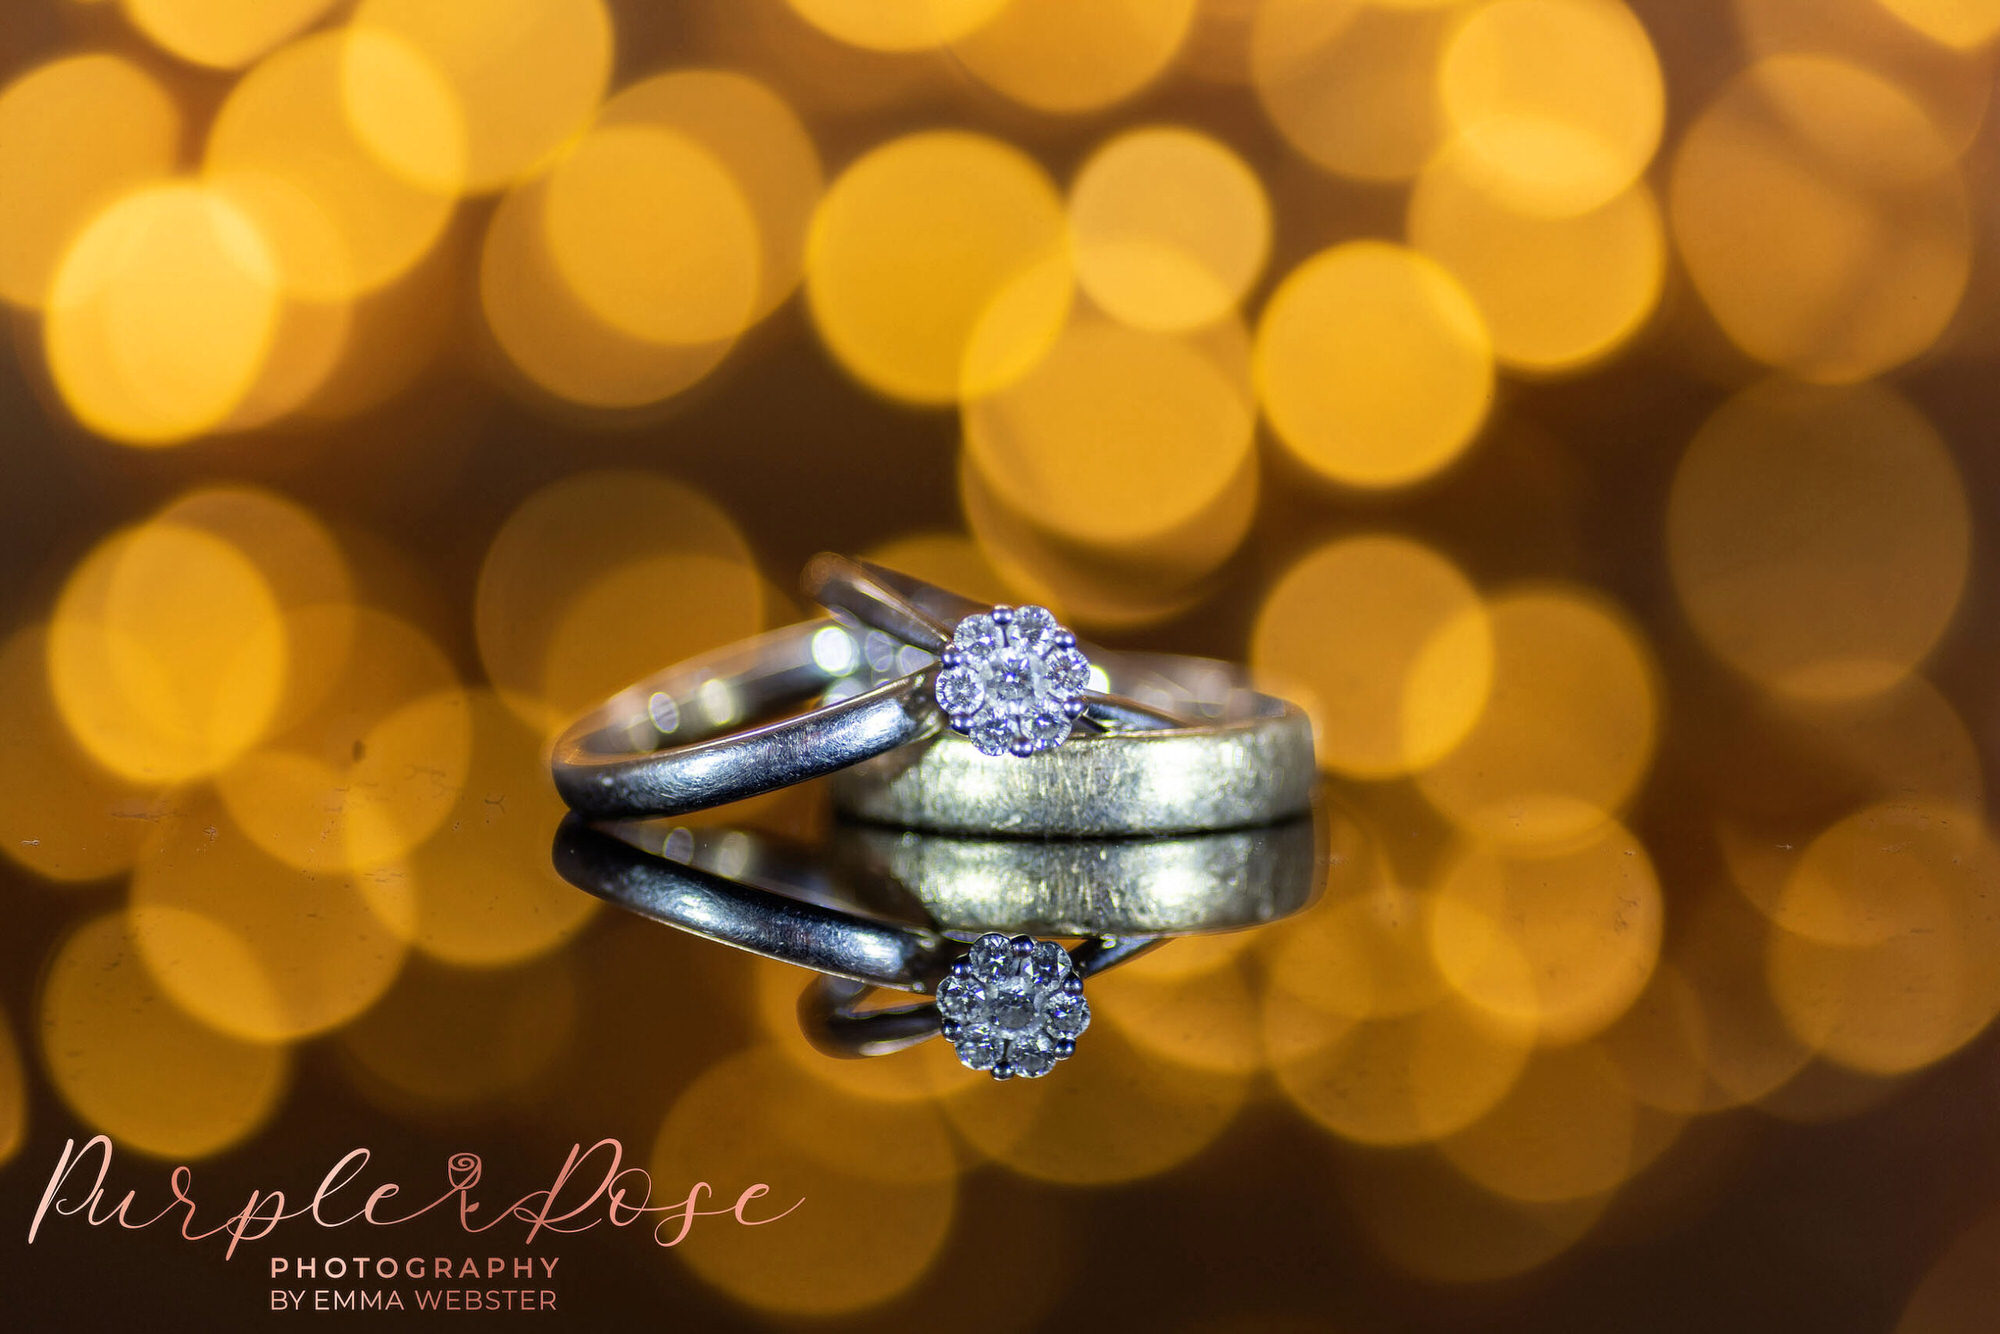 Wedding rings stacked together with engagement ring